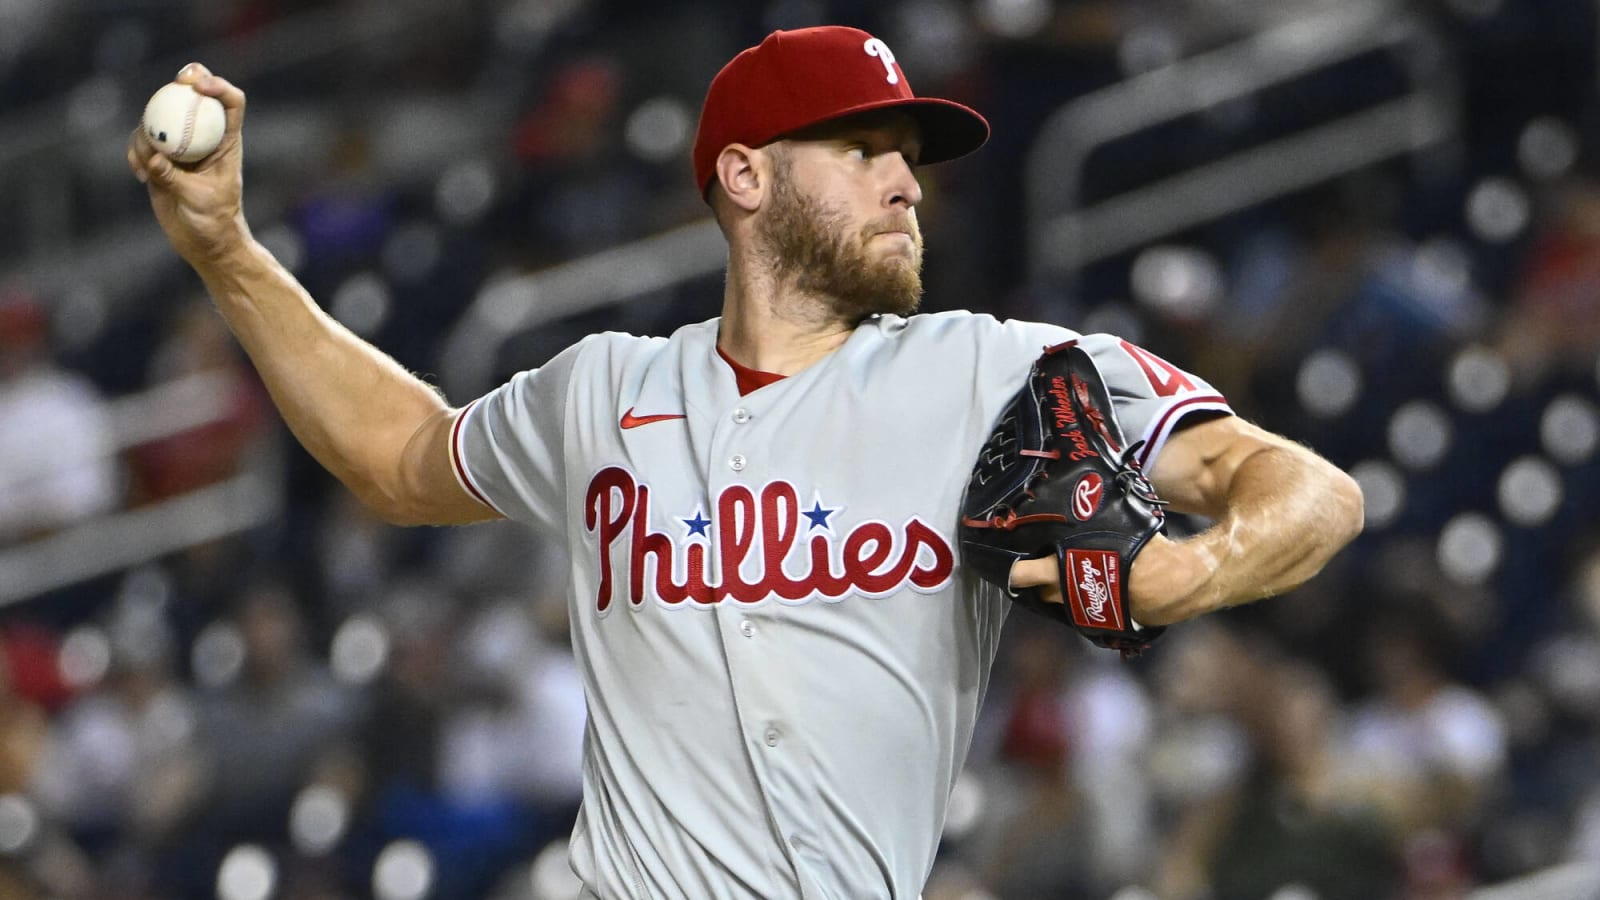 Philadelphia Phillies vs. Pittsburgh Pirates prediction and odds Thu., 7/28: Phils hope to right the ship